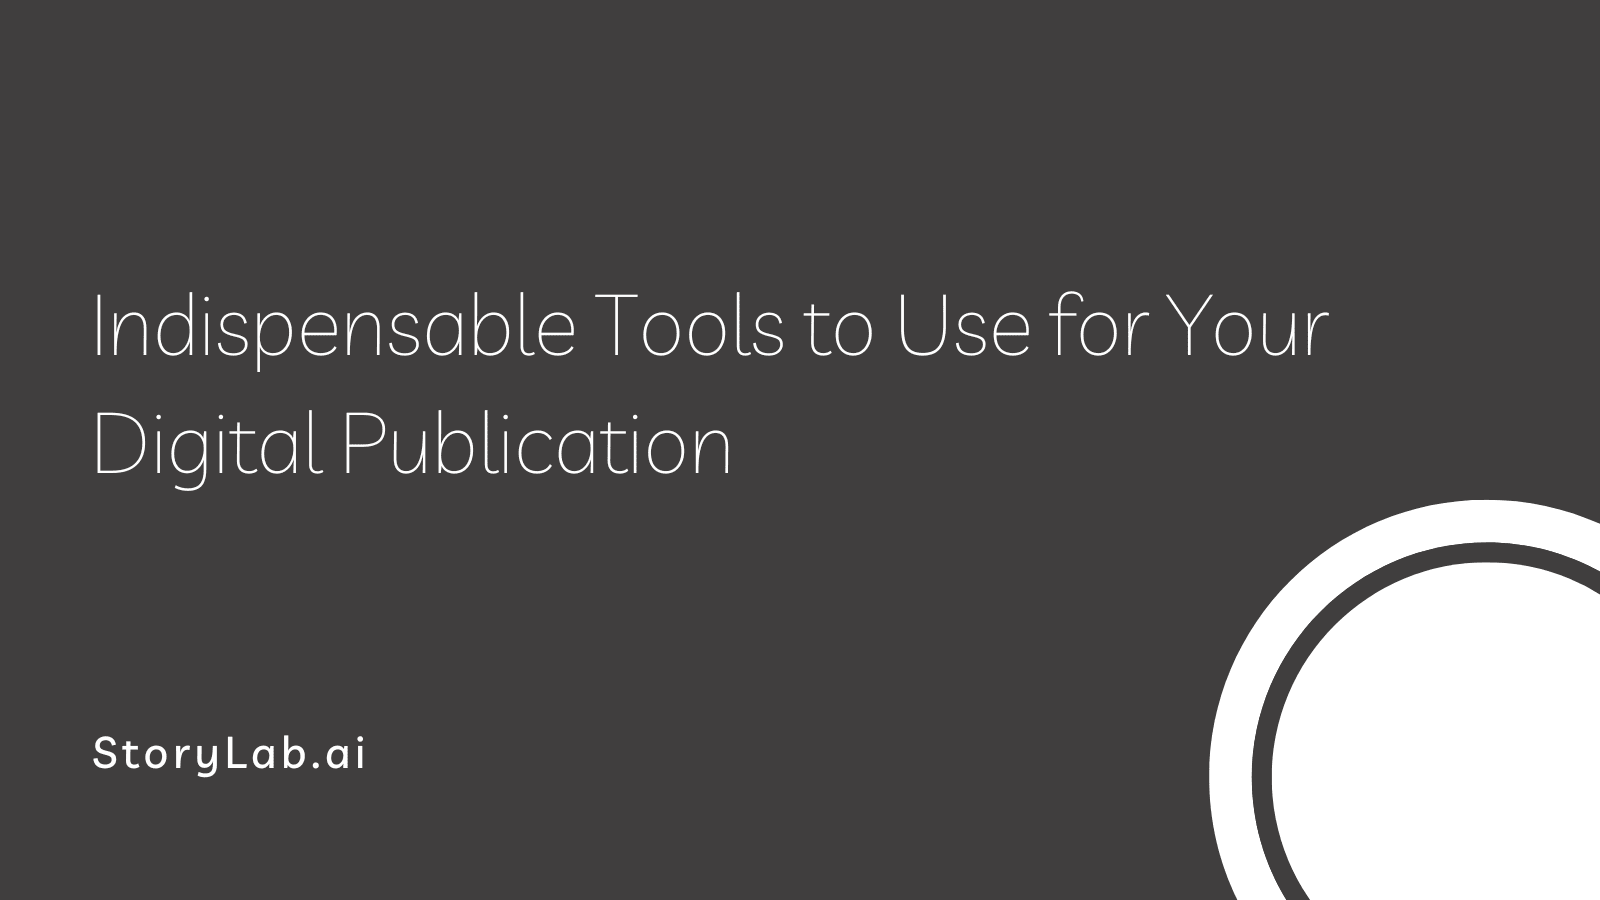 Indispensable Tools to Use for Your Digital Publication